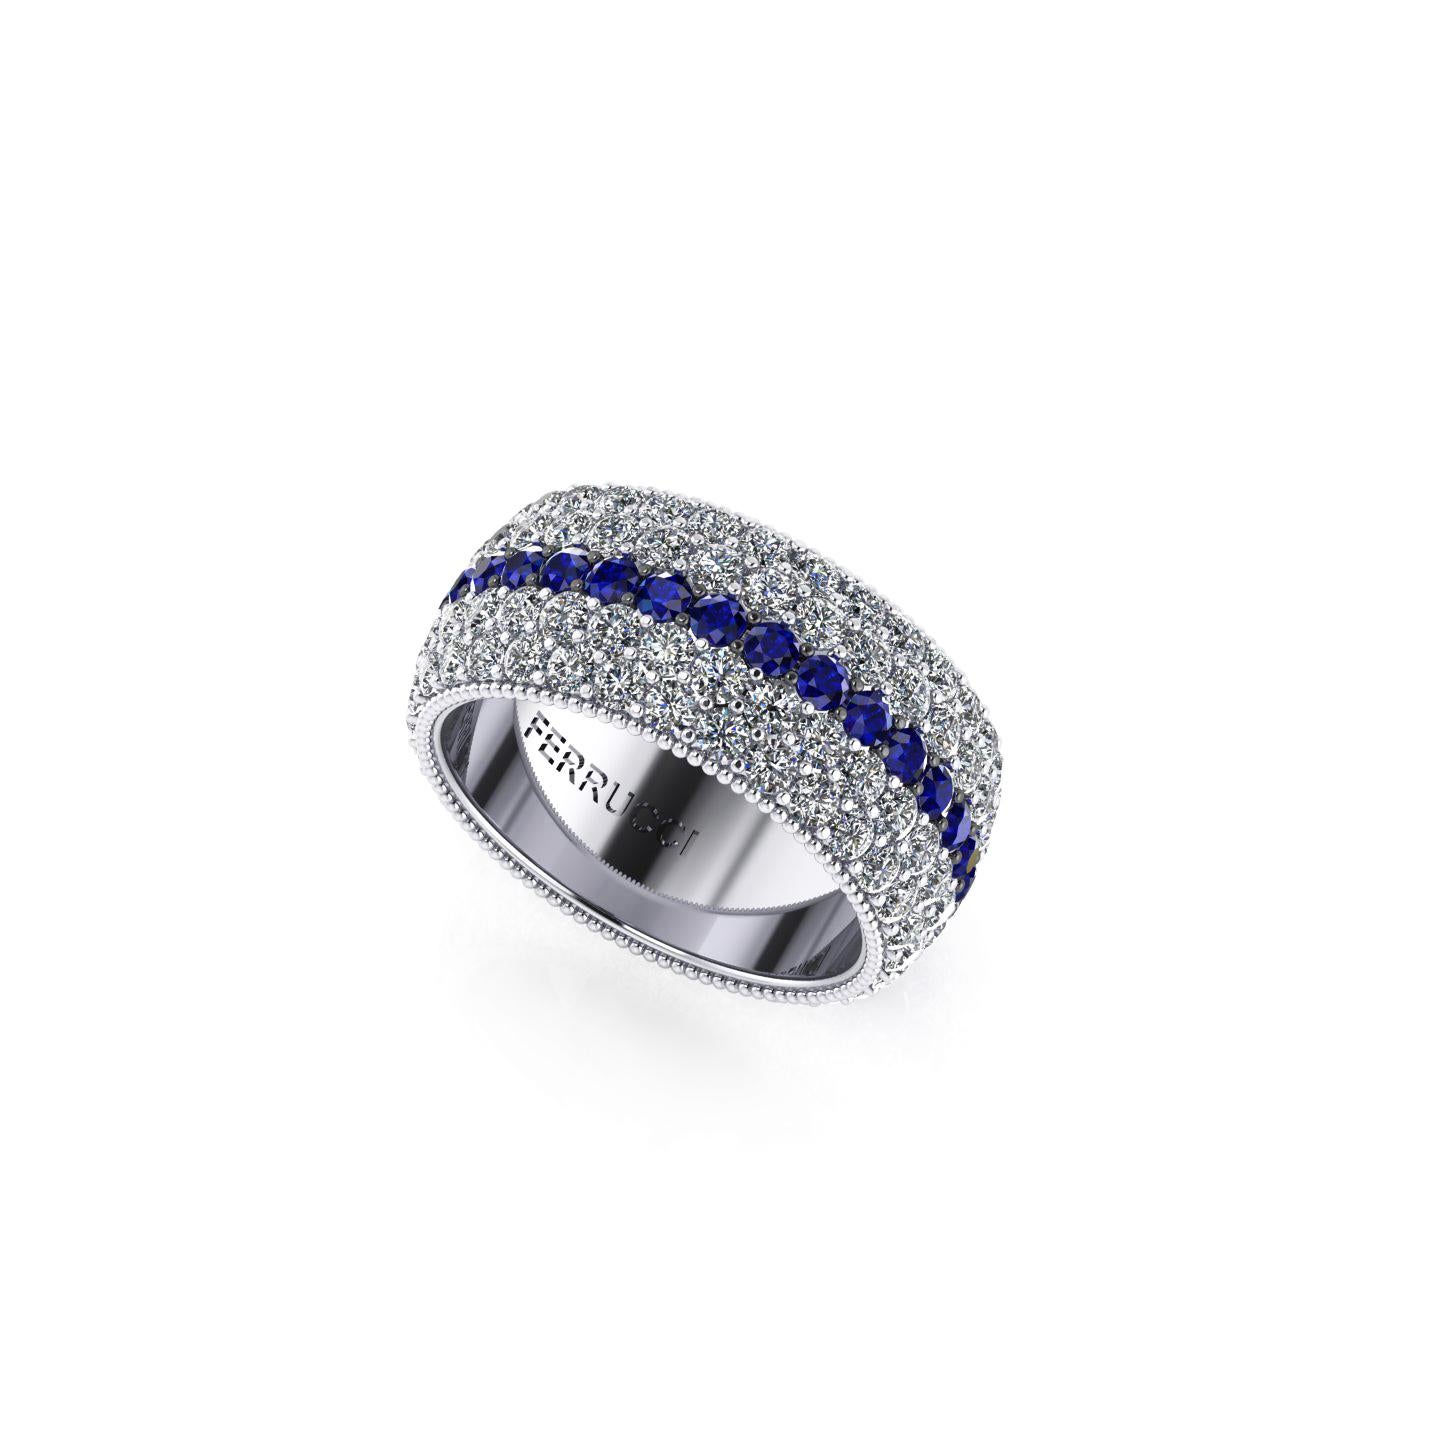 FERRUCCI Wide, diamonds dome band, a wrap of sparkling, bright white diamonds, for an approximate total carat weight of 3.40 carats, and 1.00 carats of intense blue Sapphires, hand made in New York City with the best Italian craftsmanship, 